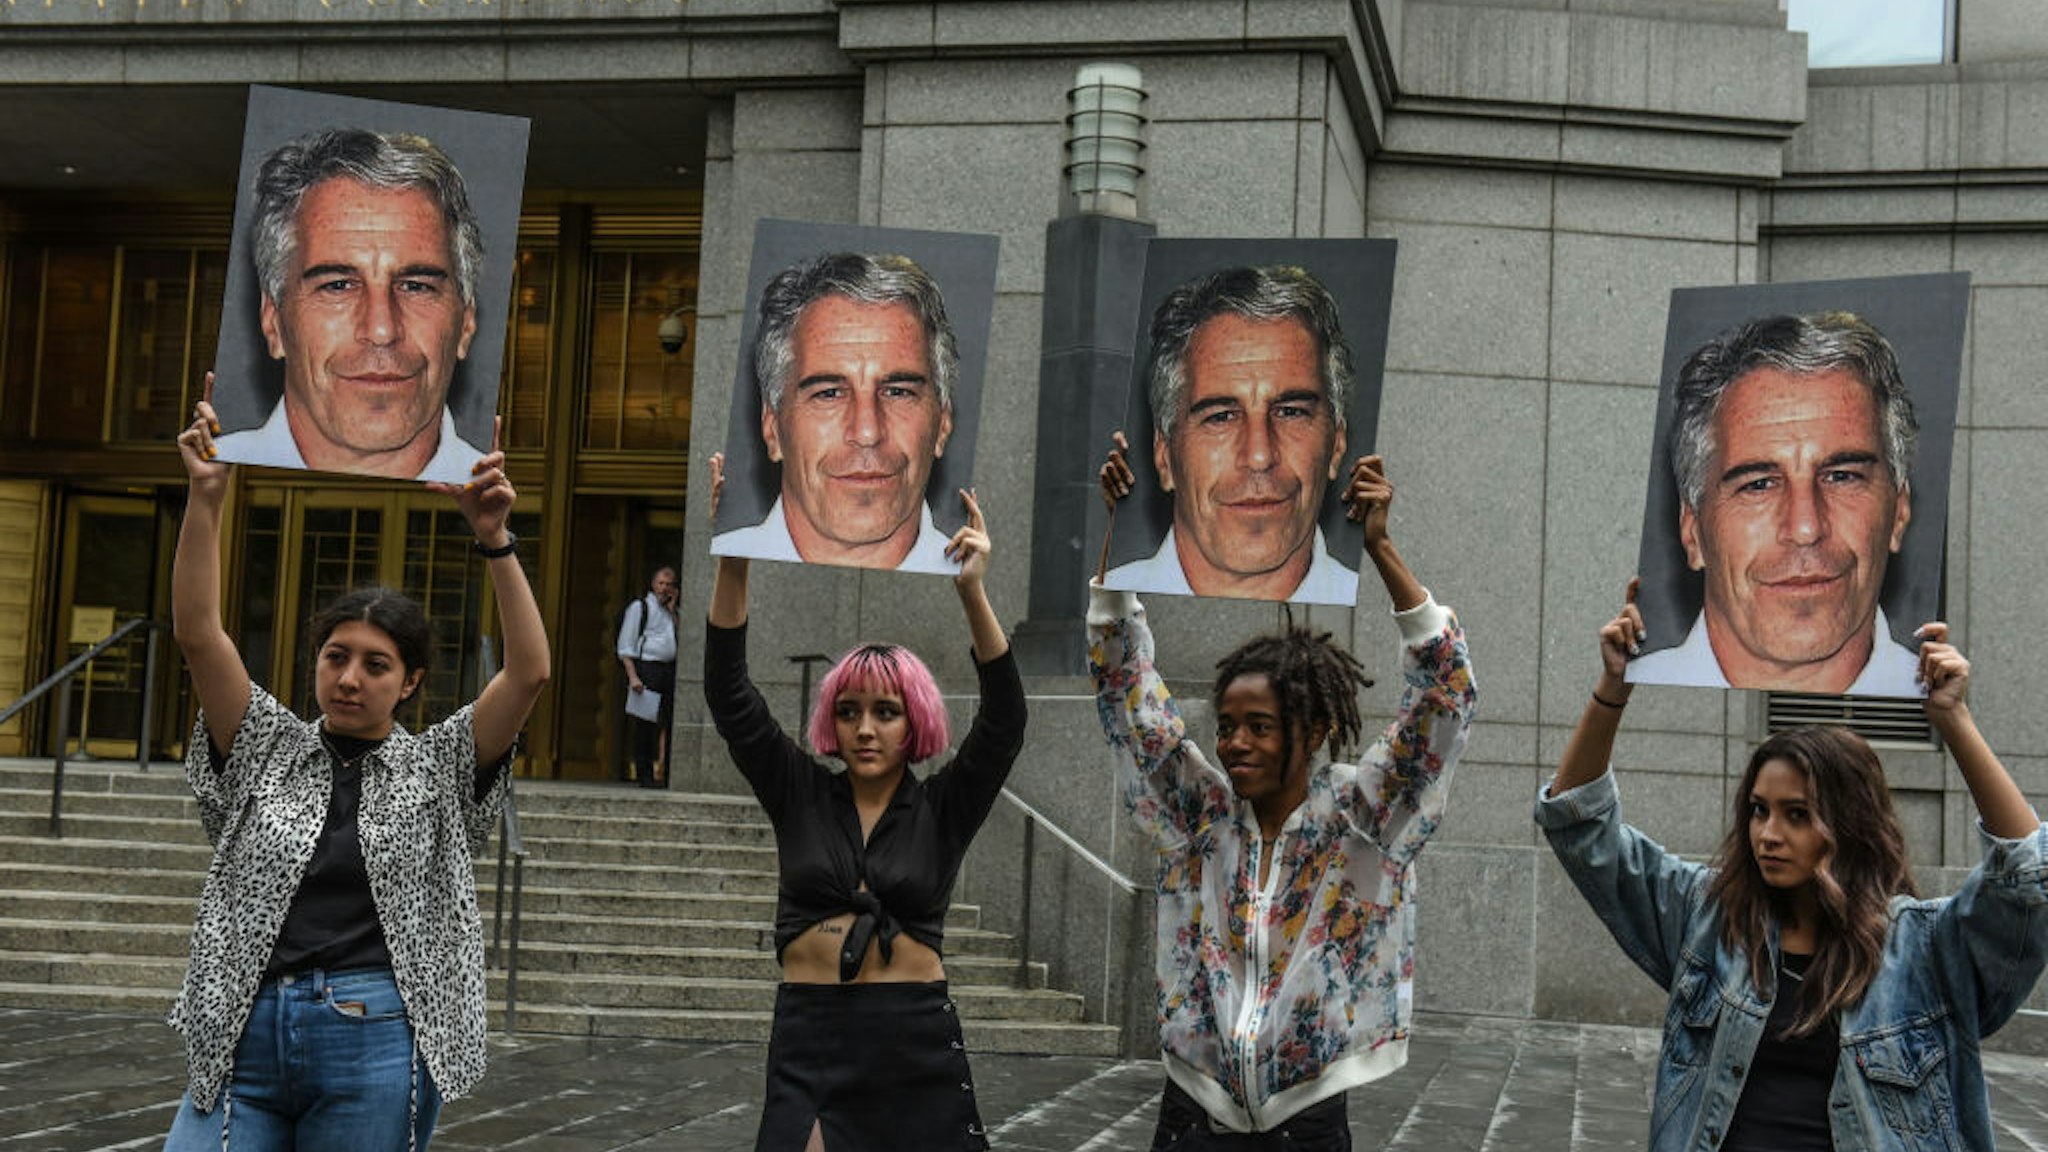 NEW YORK, NY - JULY 08: A protest group called "Hot Mess" hold up signs of Jeffrey Epstein in front of the Federal courthouse on July 8, 2019 in New York City. According to reports, Epstein will be charged with one count of sex trafficking of minors and one count of conspiracy to engage in sex trafficking of minor